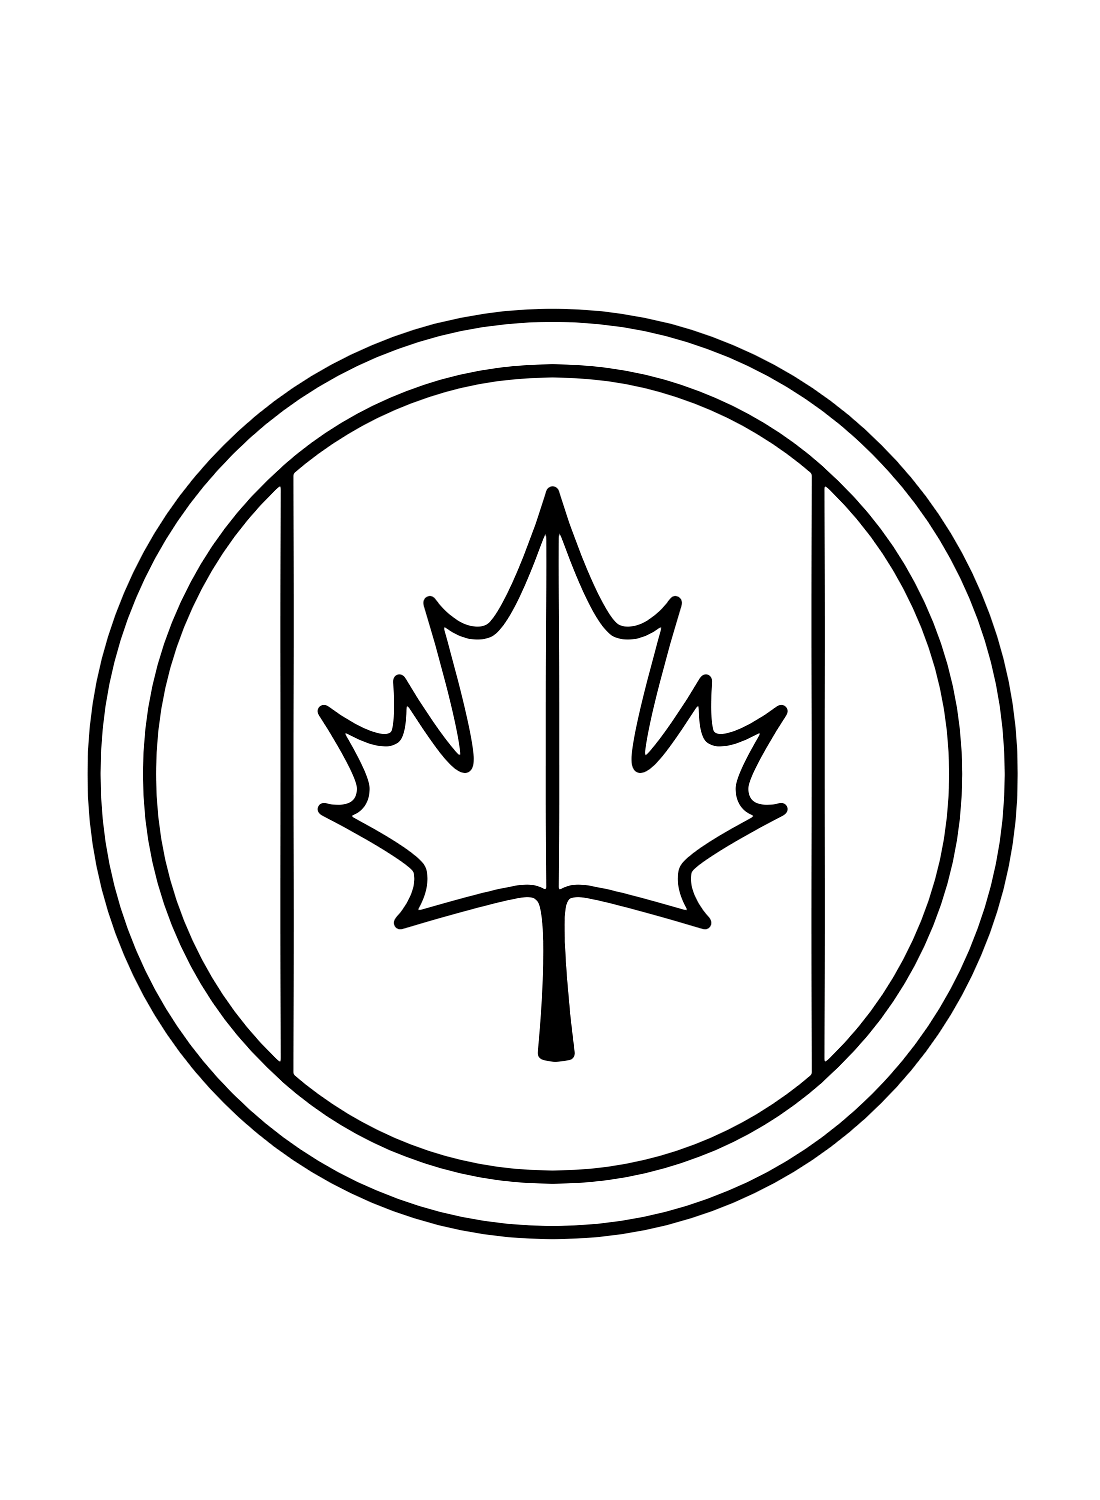 Maple leaf canadian coloring page